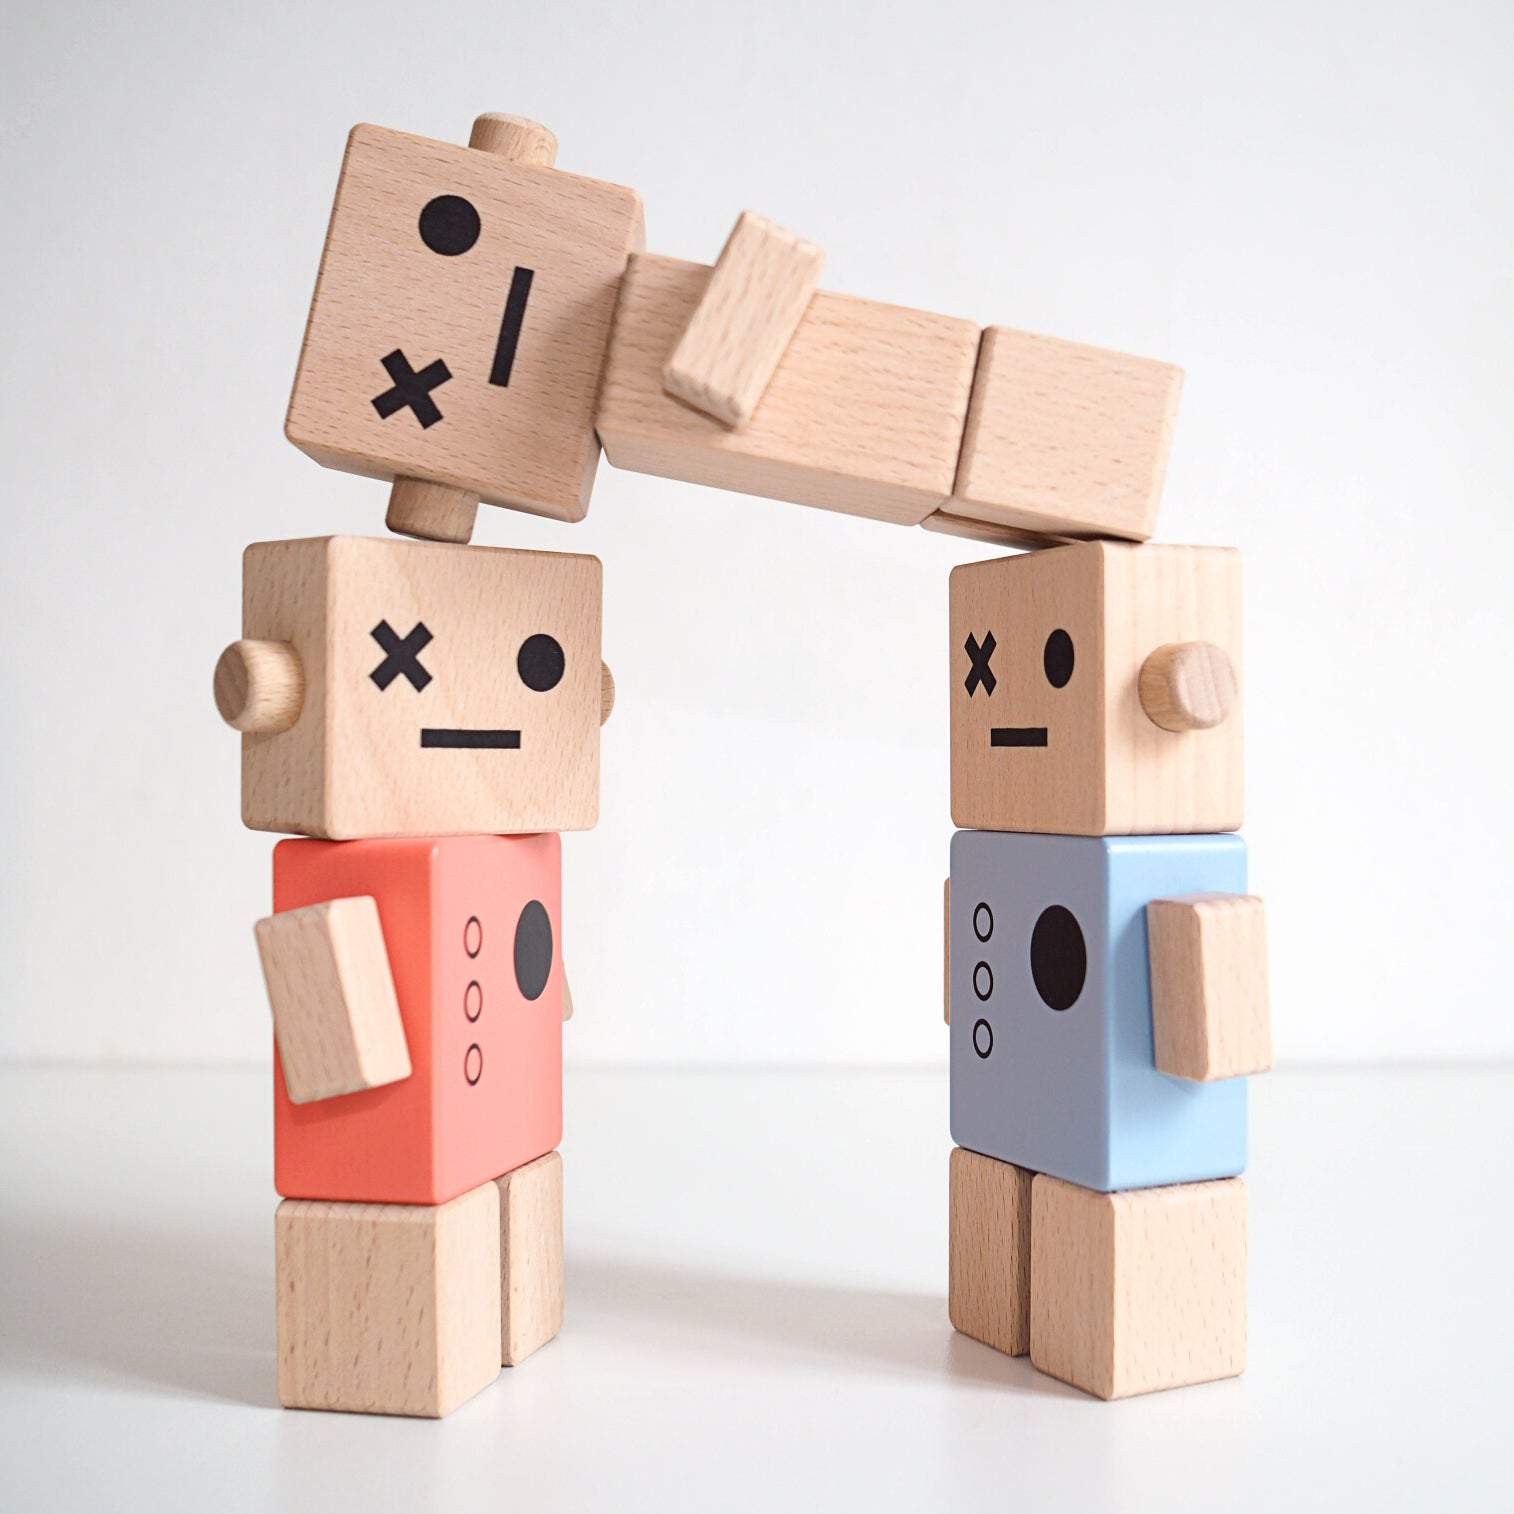 Wooden Robot Blue - thetinycrate